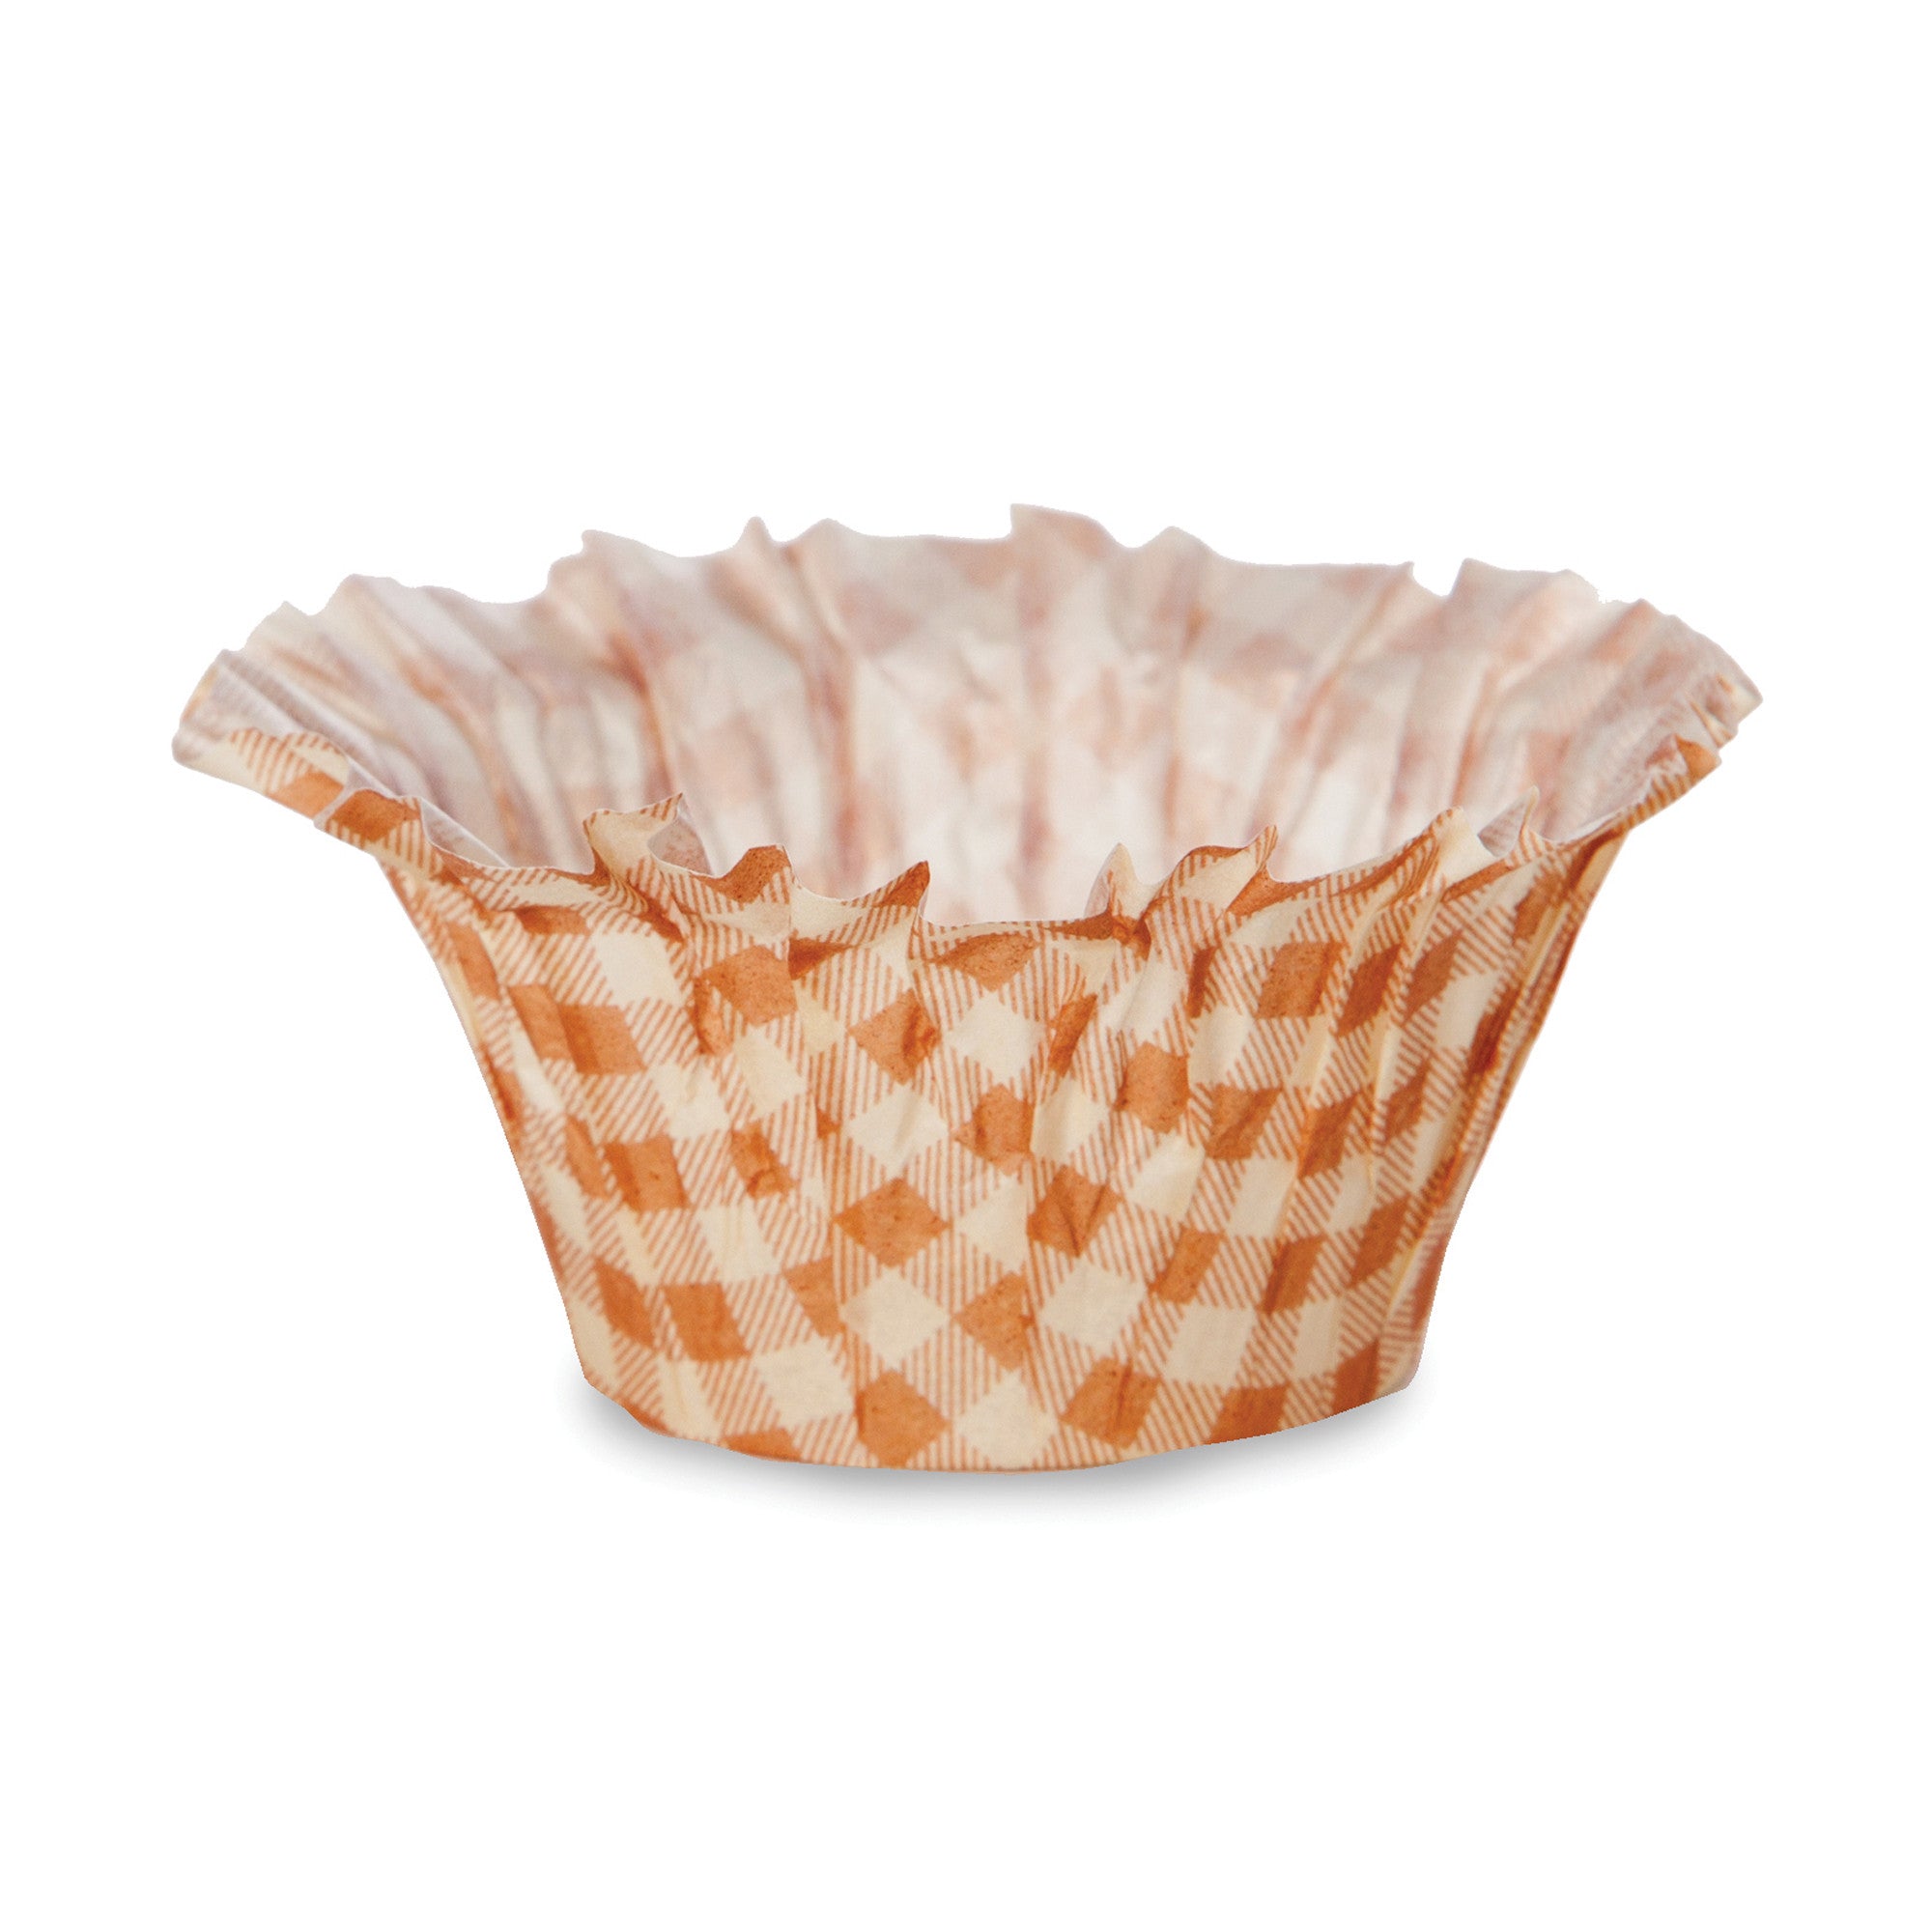 Muffin Baskets, TG0048 - Welcome Home Brands